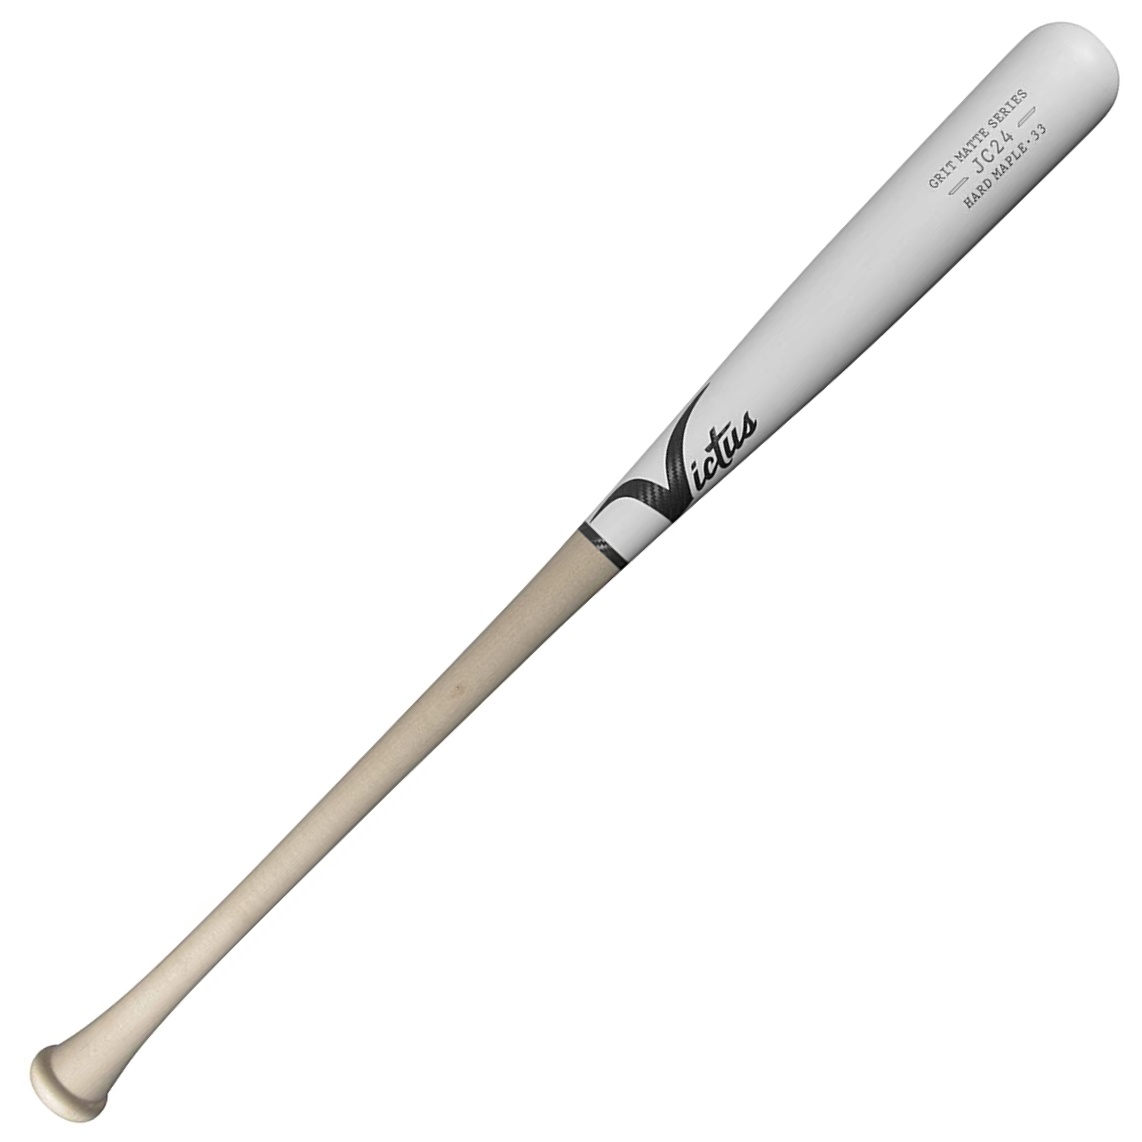 The JC24 is arguably the most well balanced and most durable bat we produce, constructed similarly to the C271, but thicker in areas essential to keeping a wood bat in one piece. The slightly flared knob provides a comfortable resting spot for your bottom hand. If you're making the transition from metal bats to wood bats, the JC24 is for you- even better for contact hitters who consistently drive the ball deep in the gaps. Victus Grit Matte bats are made for grinders. Featuring the same quality wood as our Pro Reserve line, the textured matte finish gives these bats a unique look and feel and has been rumored to grip the ball and create more backspin. - Balanced - Textured matte finish maple - Big League-grade ink dot certified - Knob: Slight flare - Handle: Medium - Barrel: Medium - NO warranty